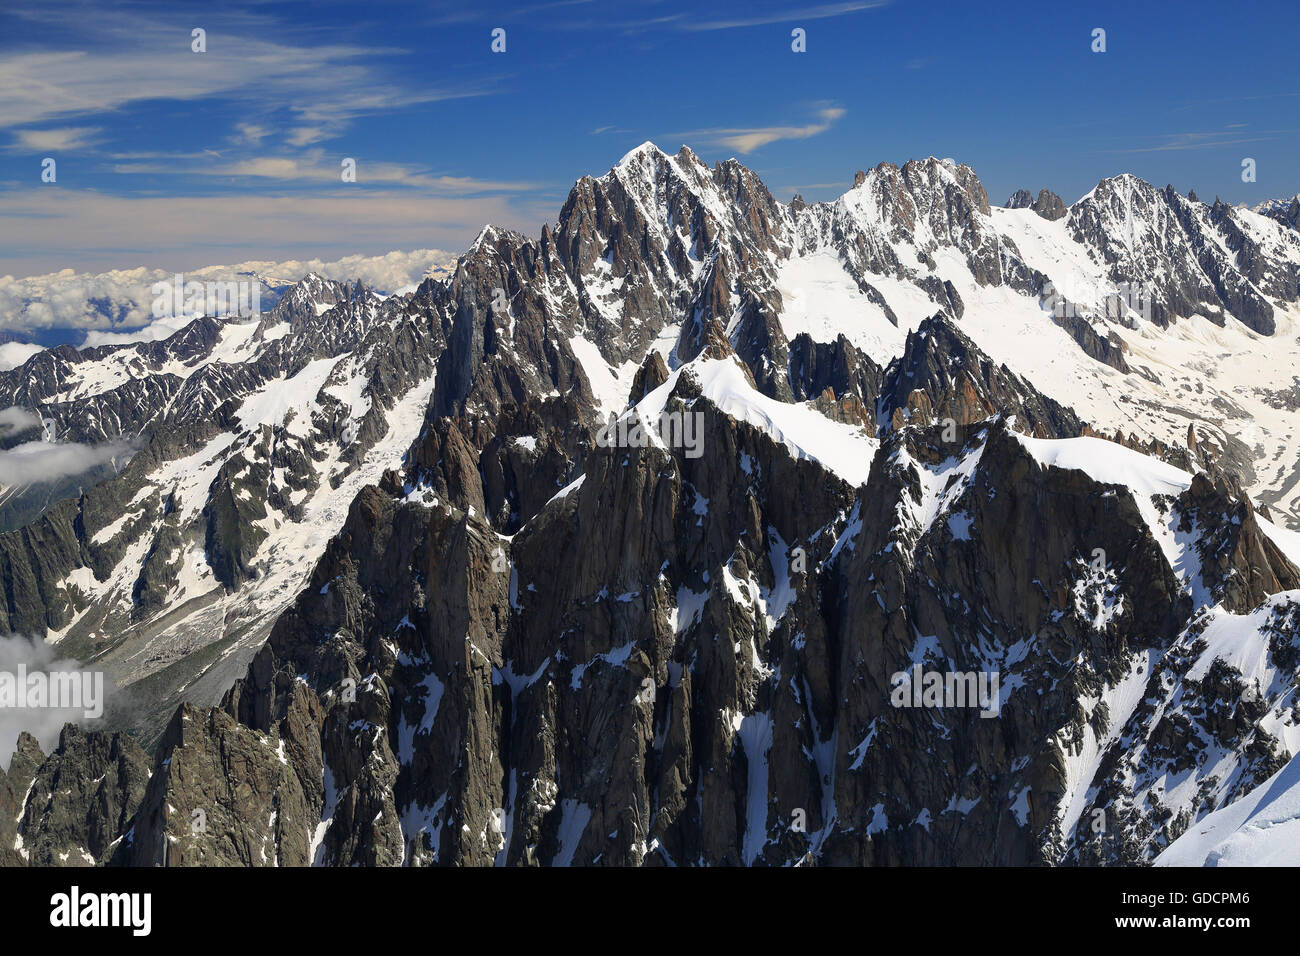 Climbers on French Alps Mountains near Aiguille du Midi, France, Europe Stock Photo